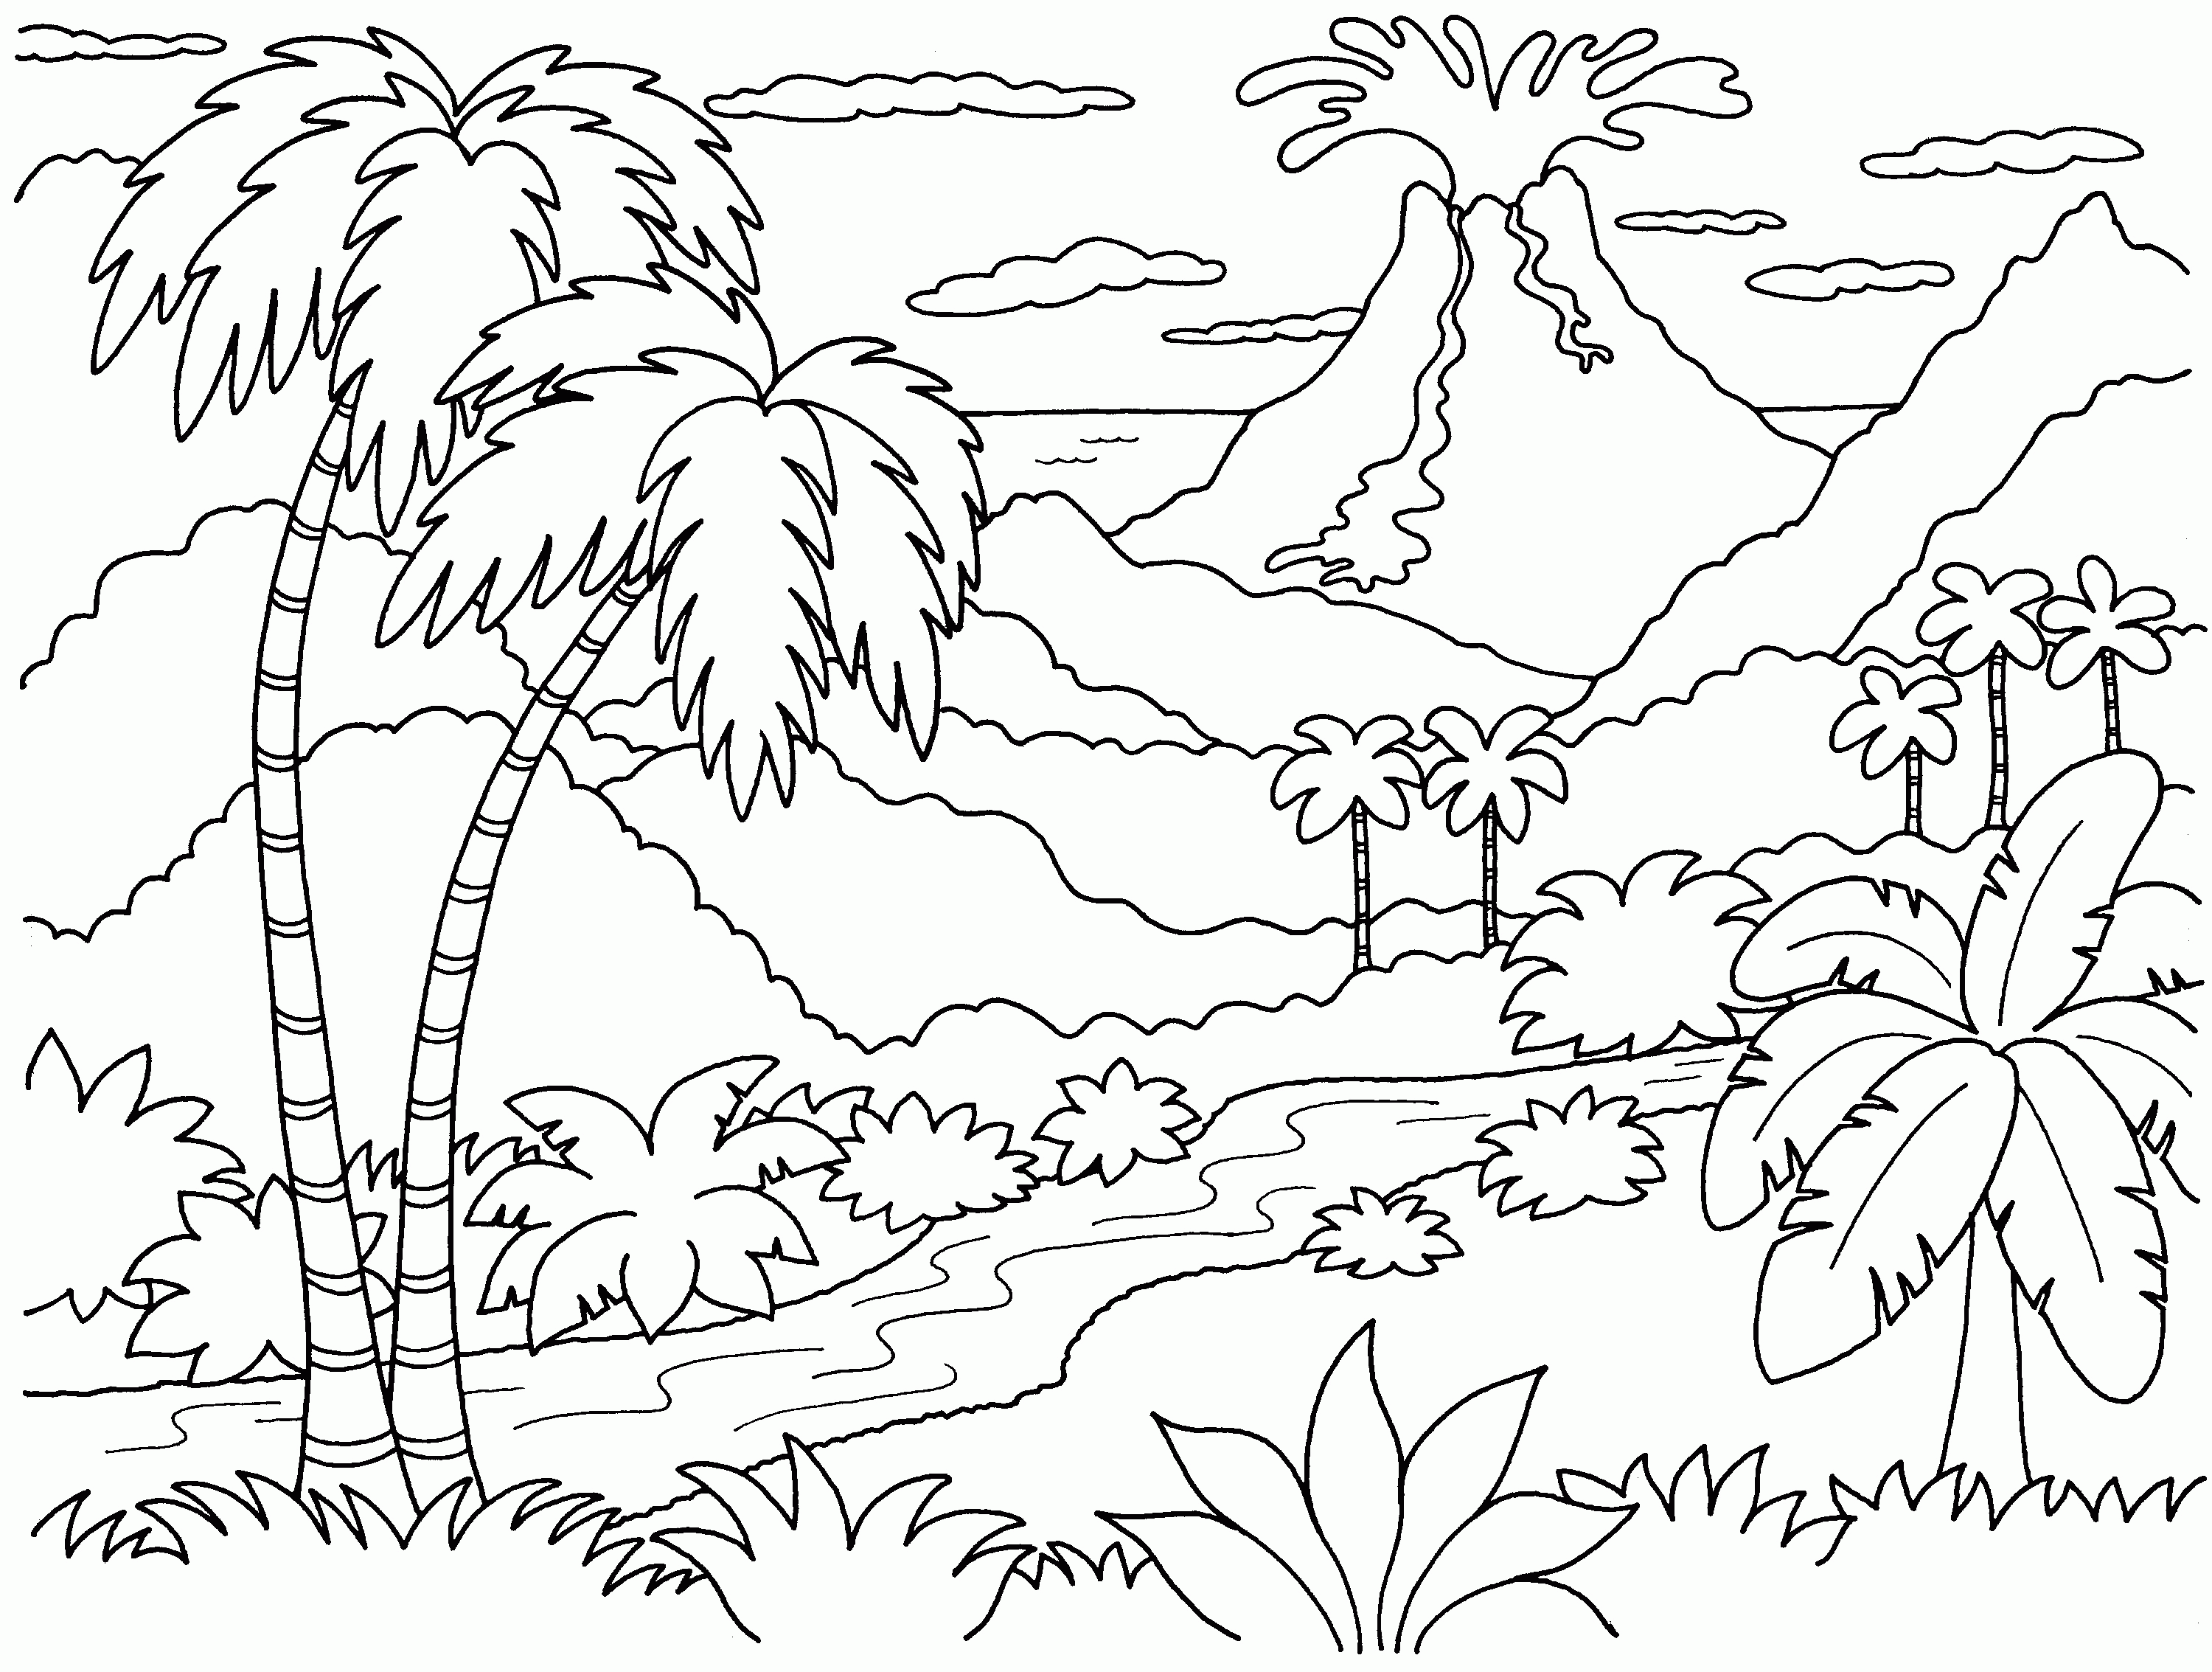 Volcano Coloring Pages (18 Pictures) - Colorine.net | 4542